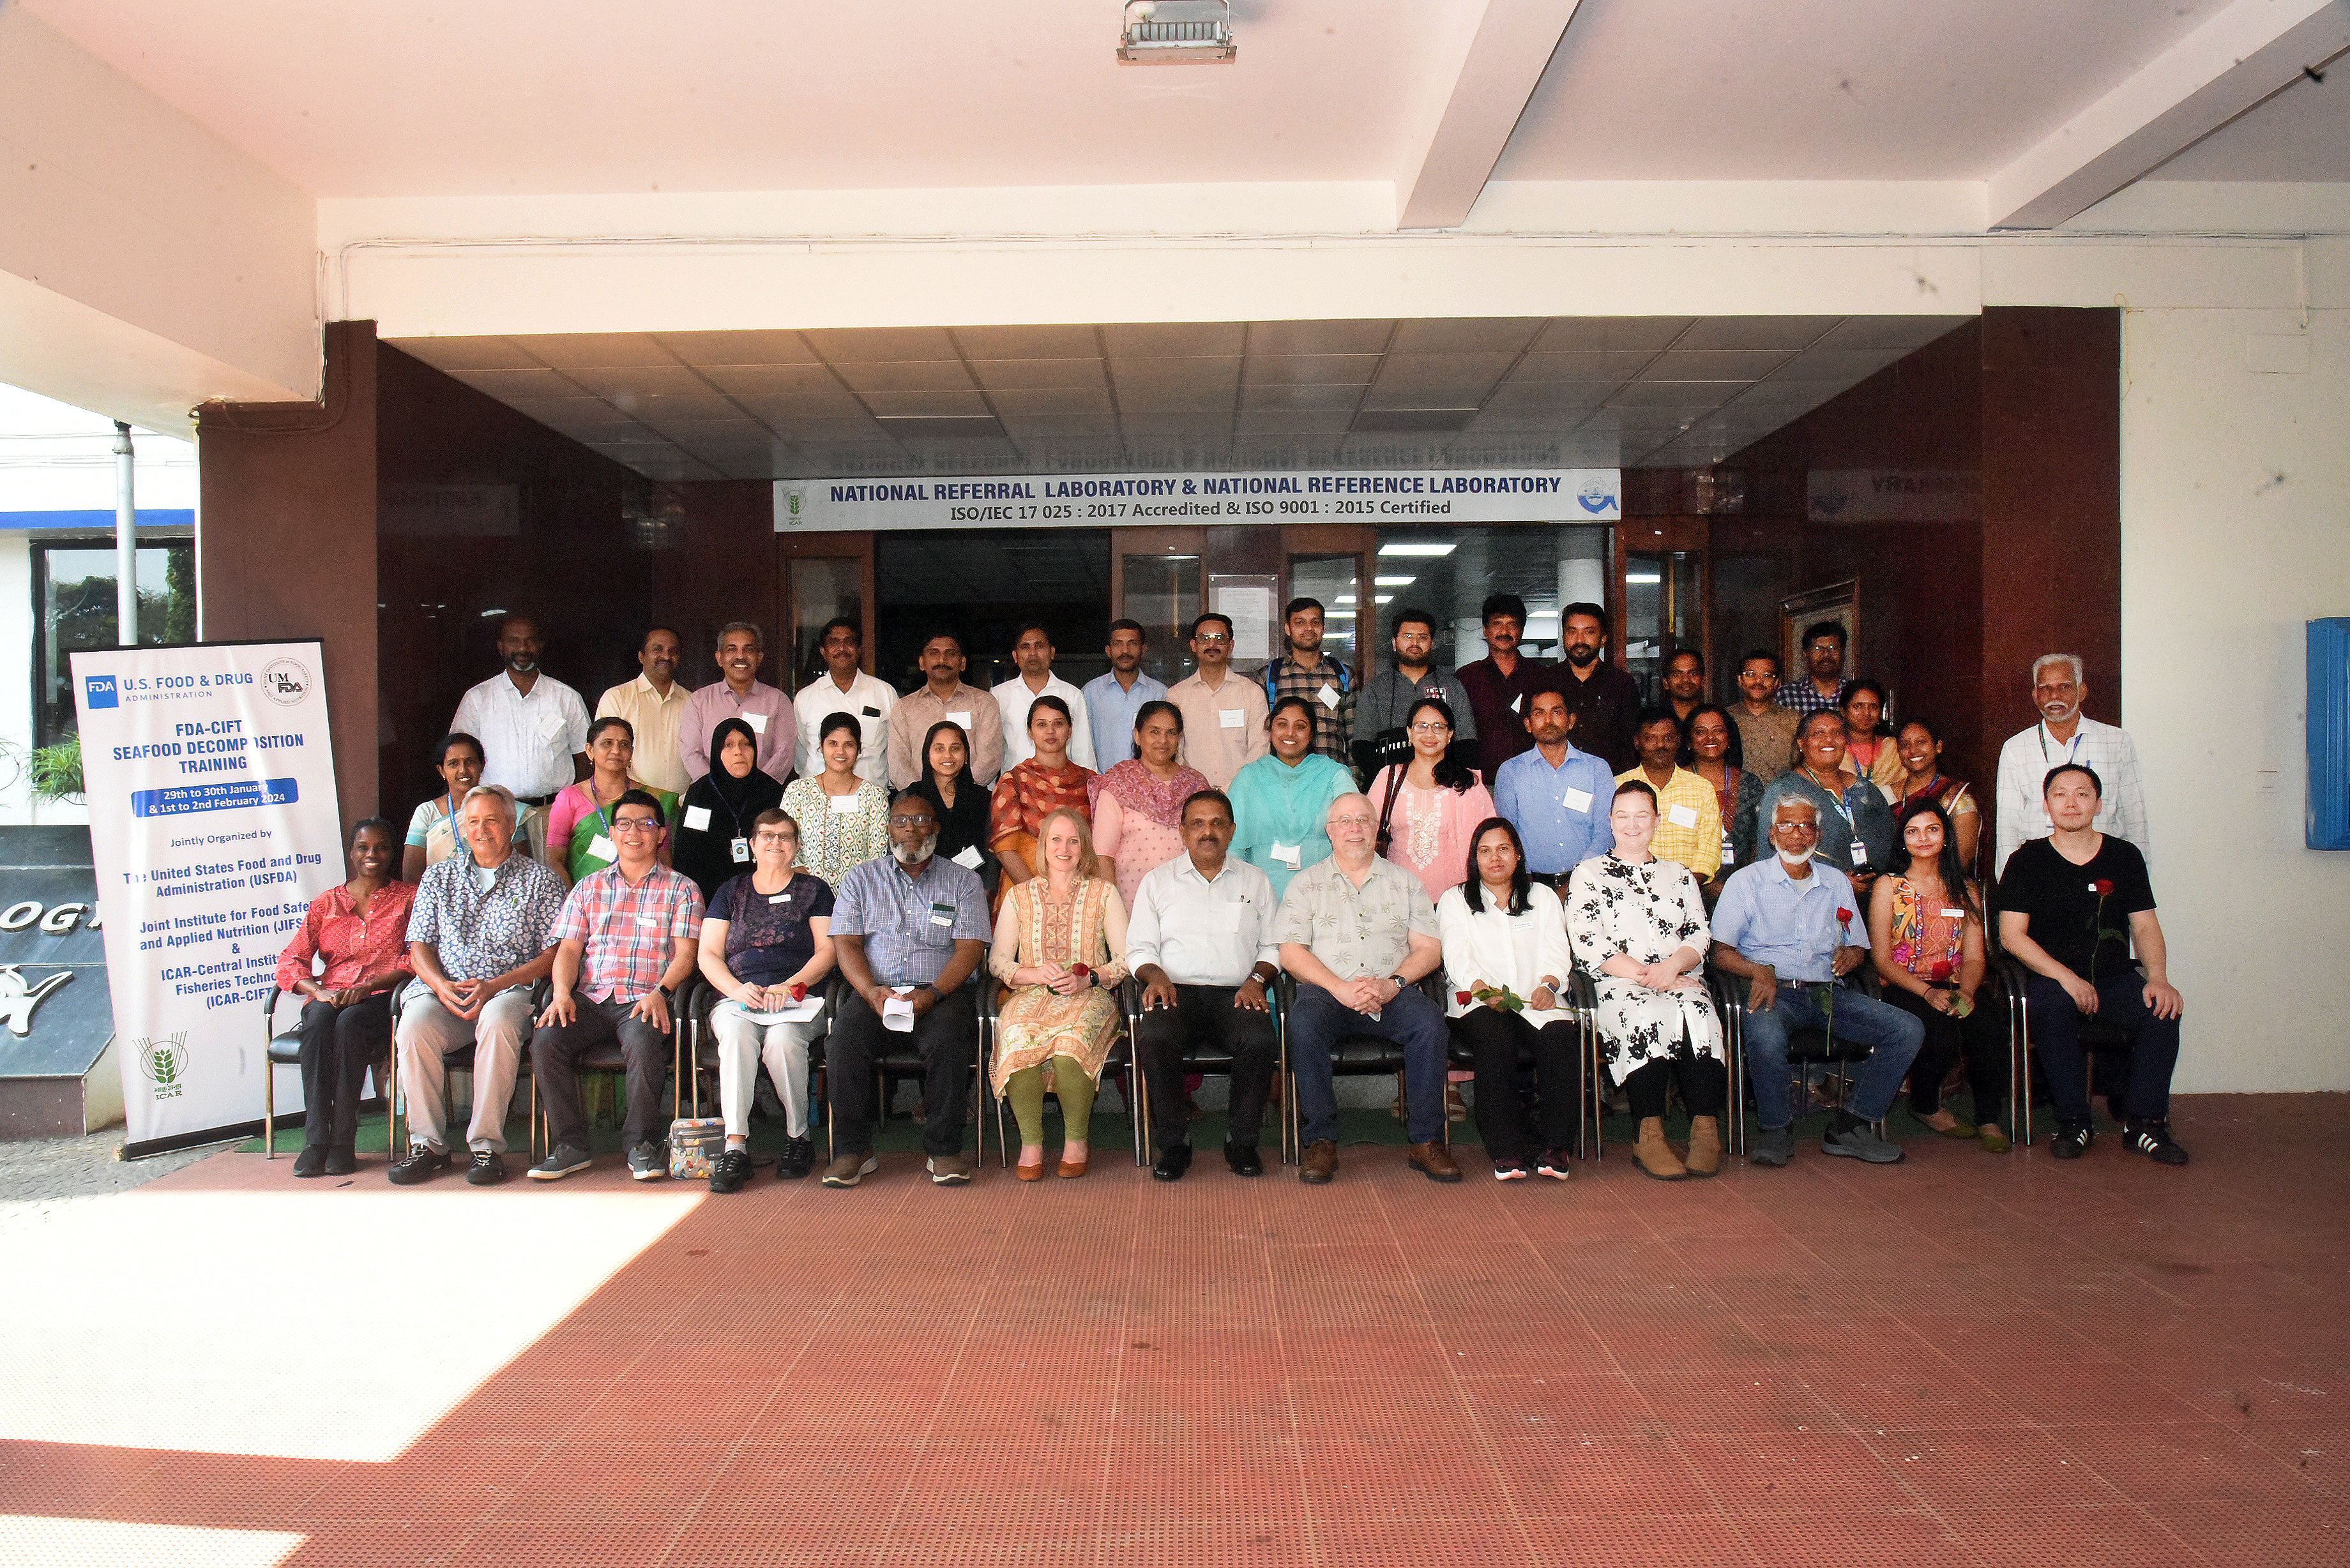 Group photo of the training participants in front of a sign reading National Referral Laboratory & National Reference Laboratory.